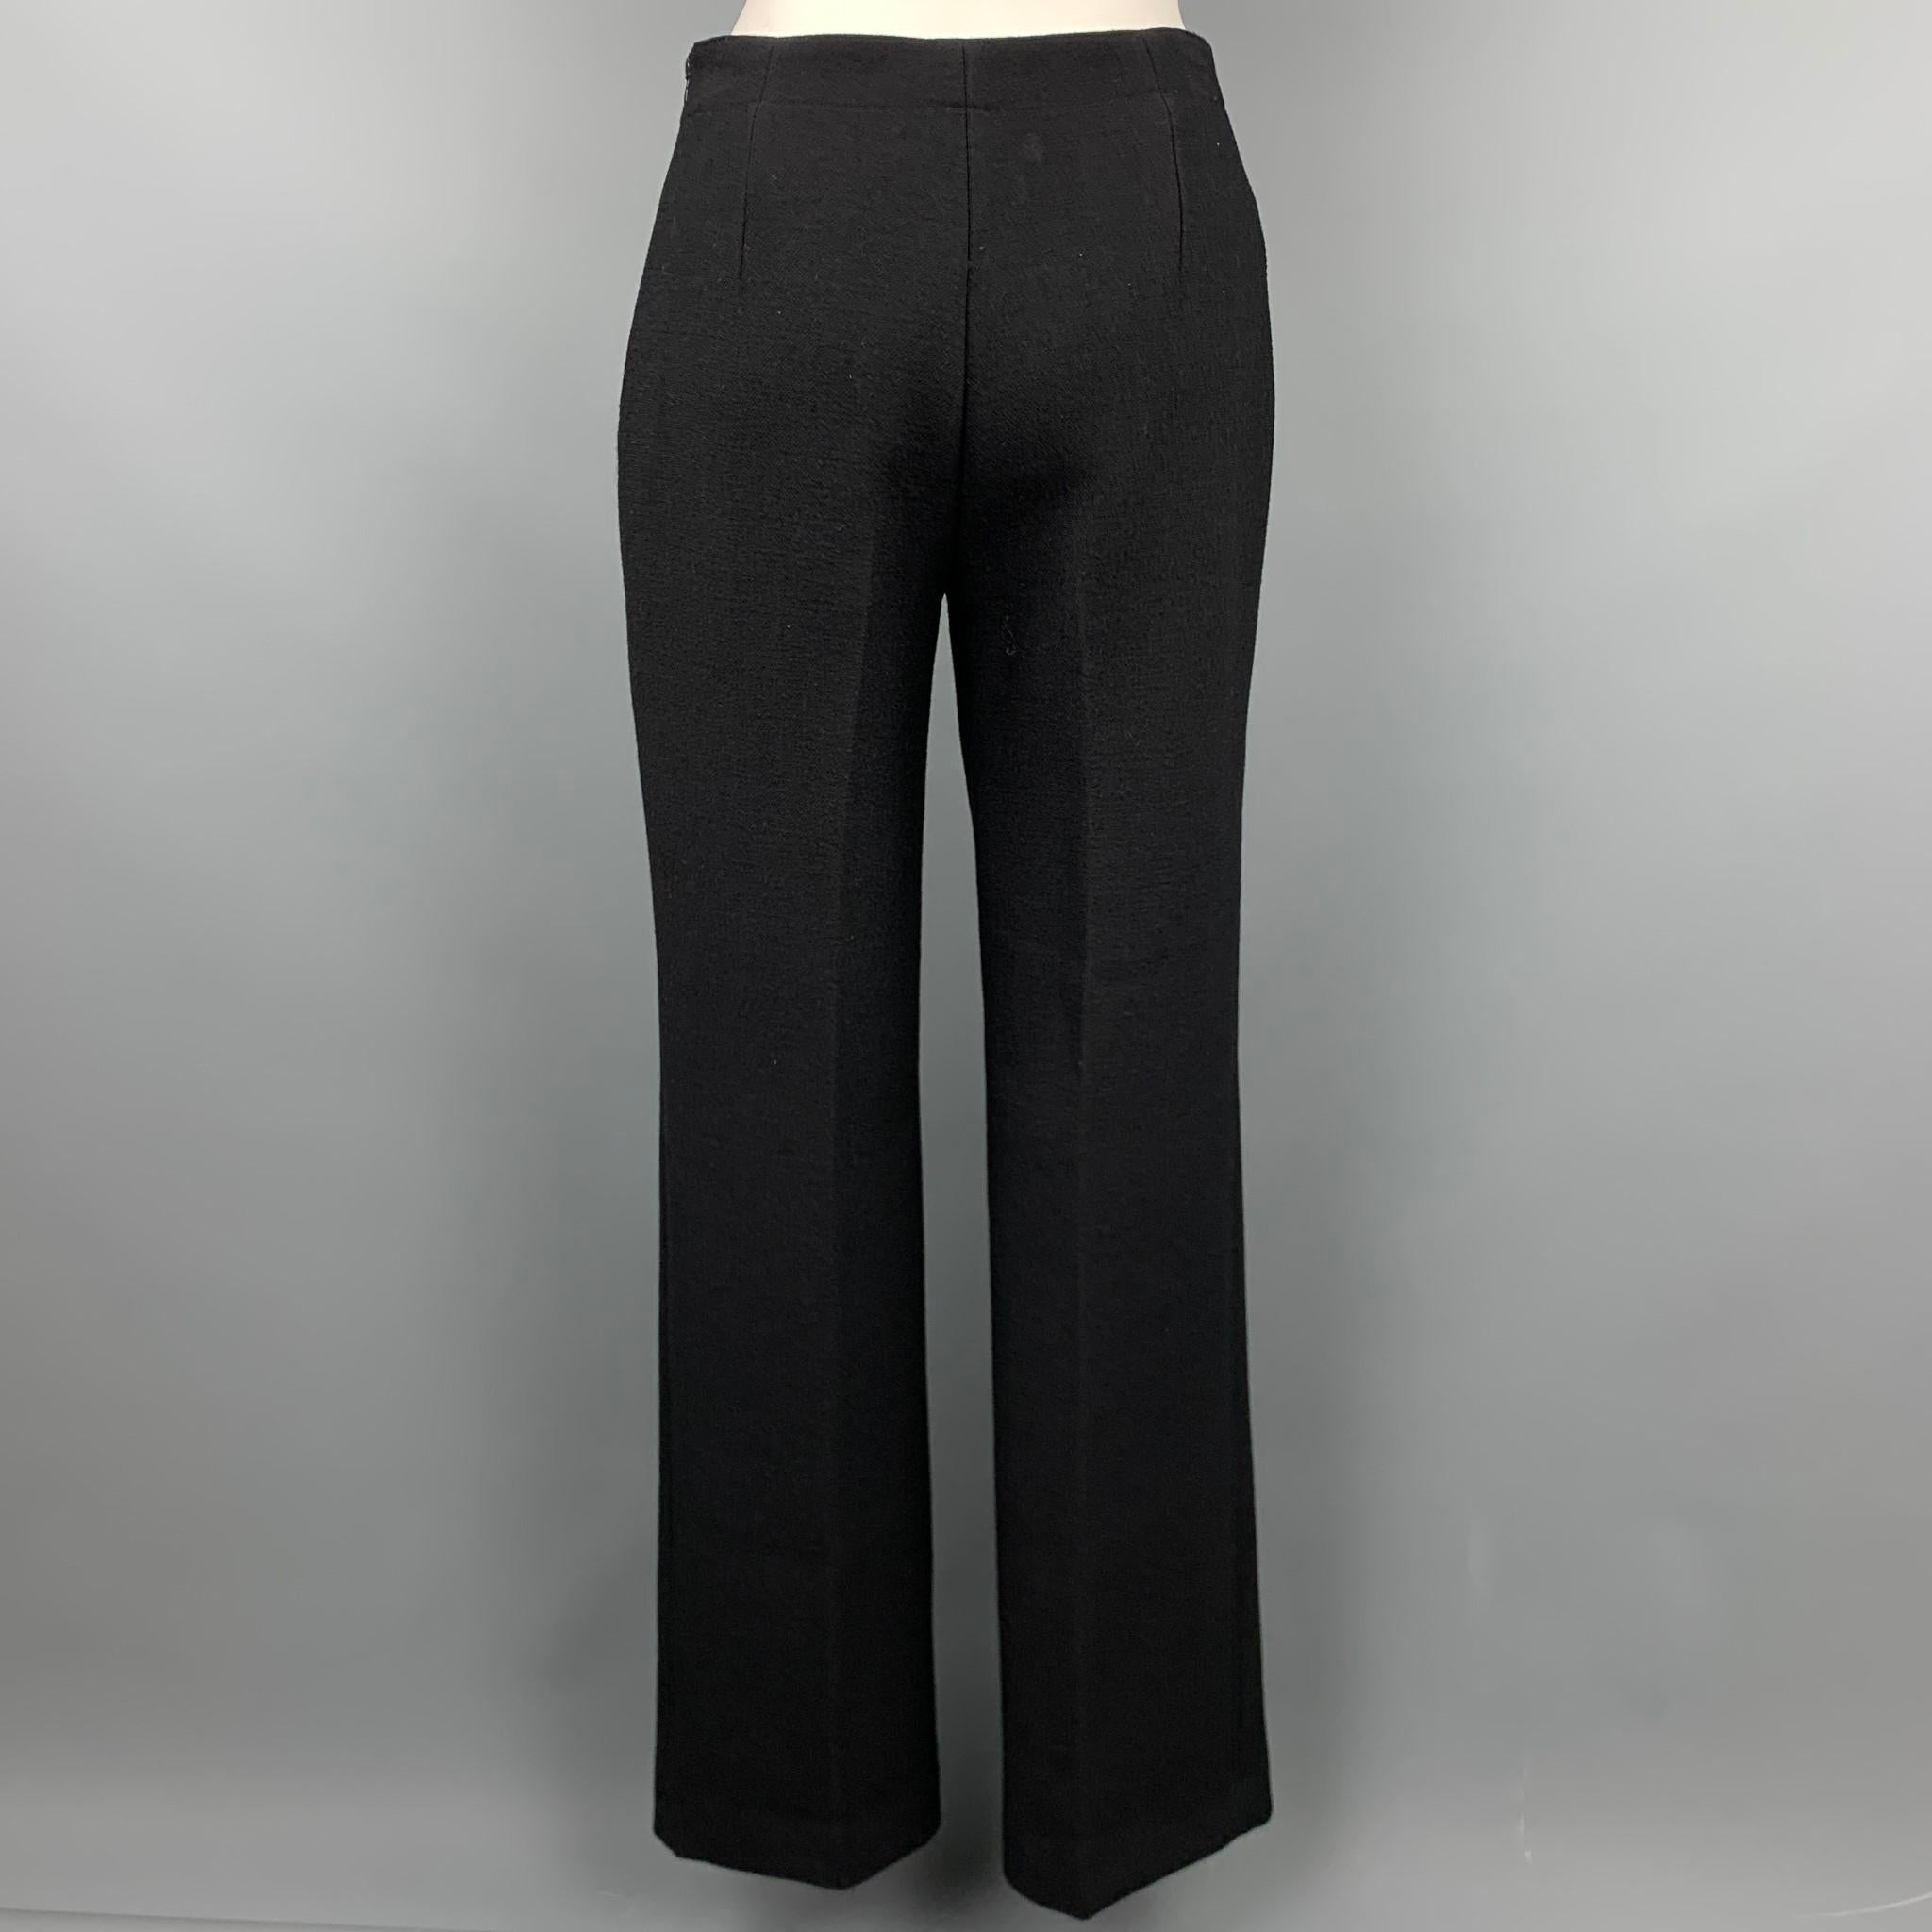 ALAIA dress pants in a heavy wool canvas fabric featuring a streamline, minimalist construction, flat front, straight leg, and side zip closure. Made in Italy.

Excellent Pre-Owned Condition.
Marked: 38

Measurements:

Waist: 28 In.
Rise: 10